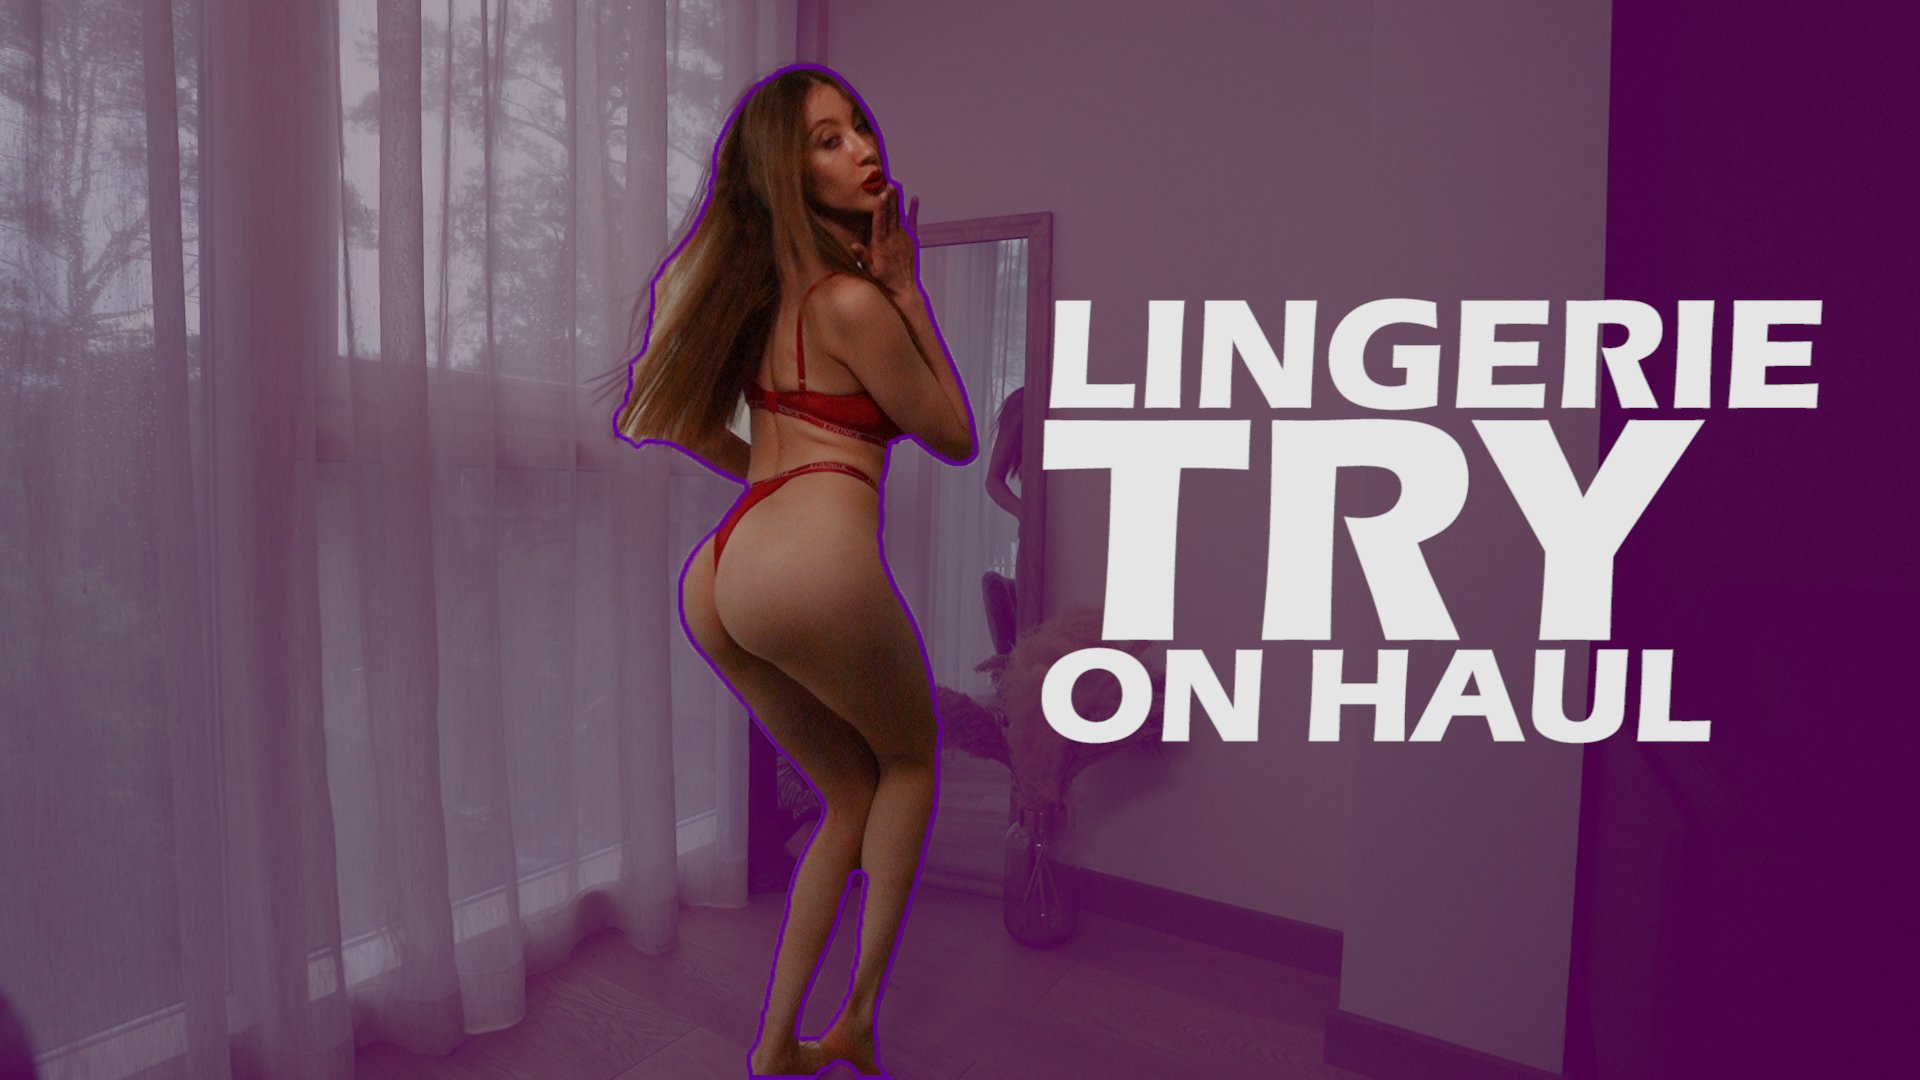 KatiaBang on X: Lounge Try on Haul video is live now on my  channel  🥳🥳 Go watch it and don't forget leave some comments and like! #lingerie # tryon #tryonhaul #lounge #loungeunderwear